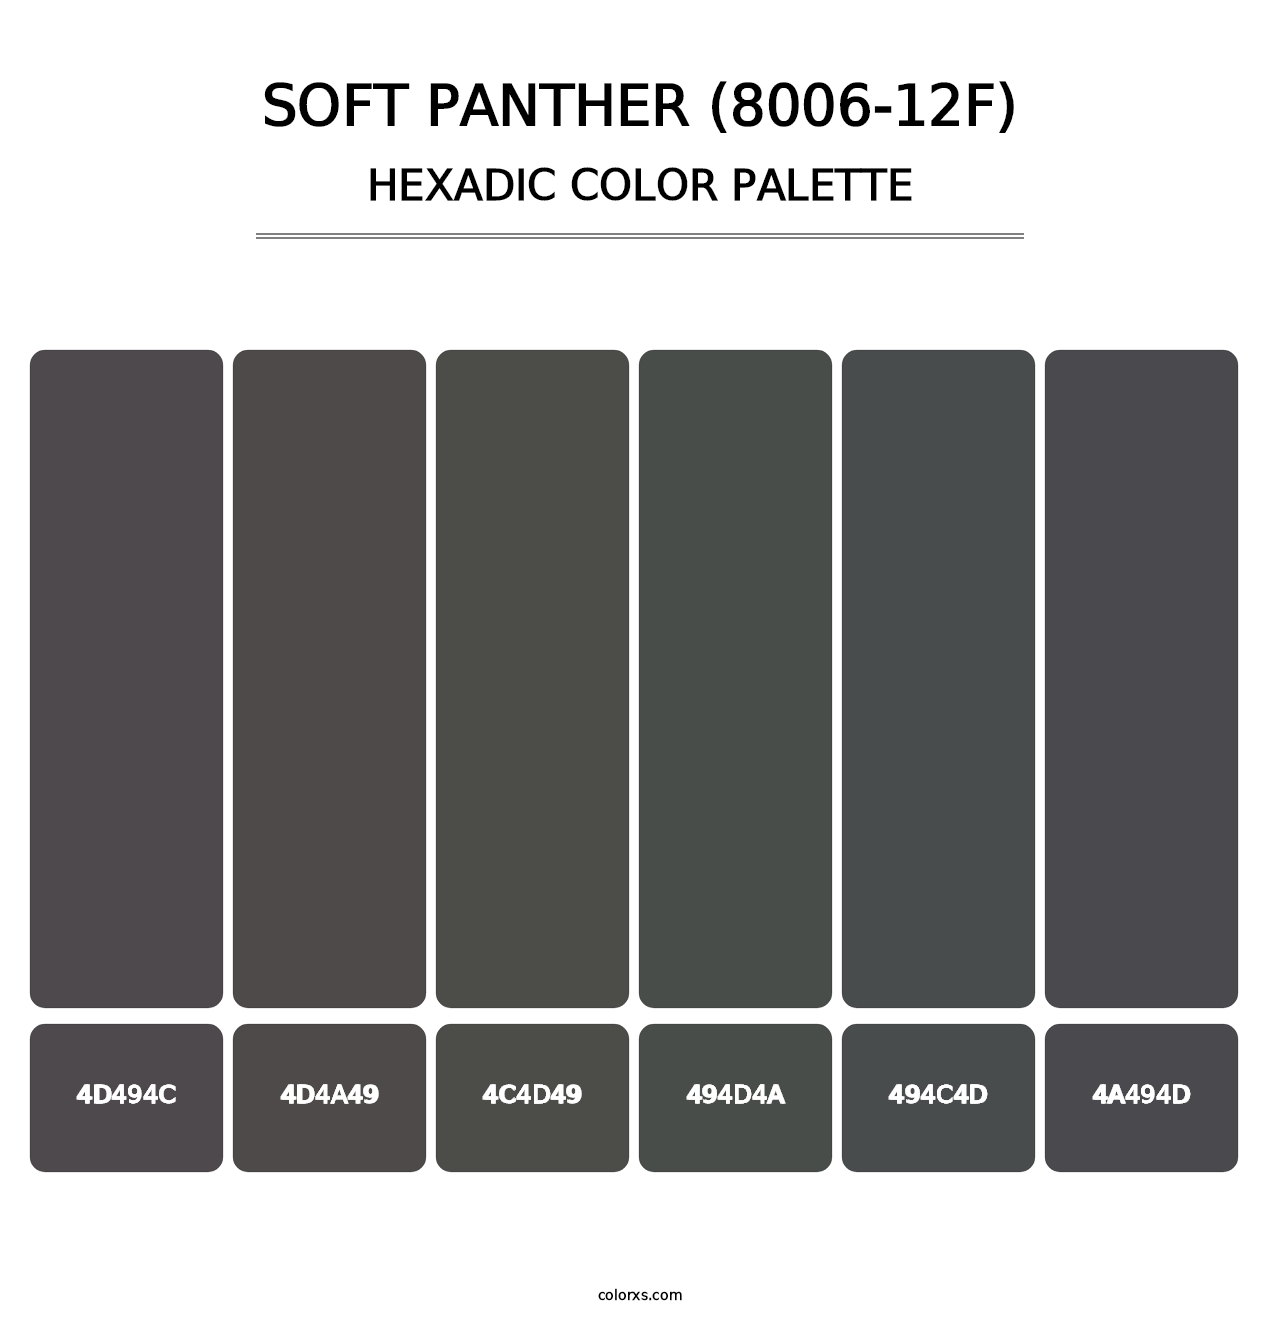 Soft Panther (8006-12F) - Hexadic Color Palette